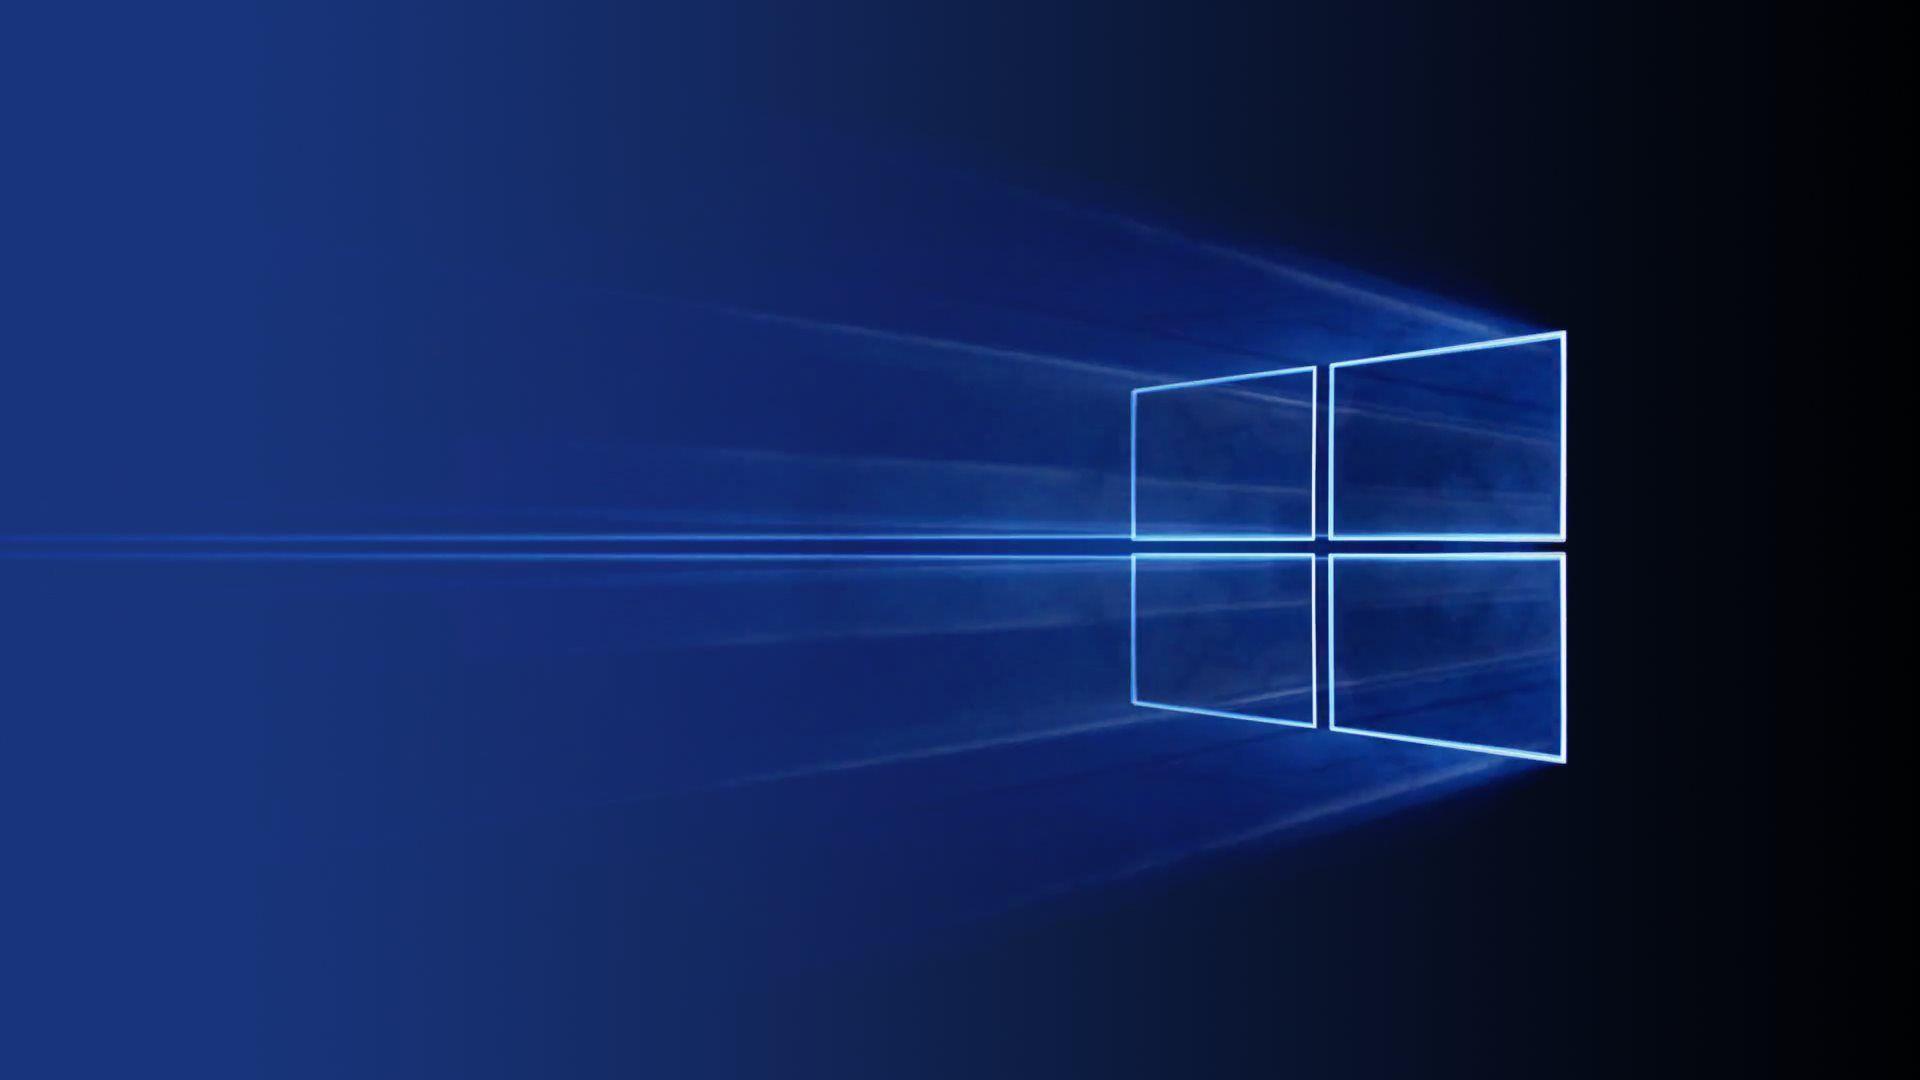 Microsoft Wallpapers HD, Desktop Backgrounds, Image and Pictures